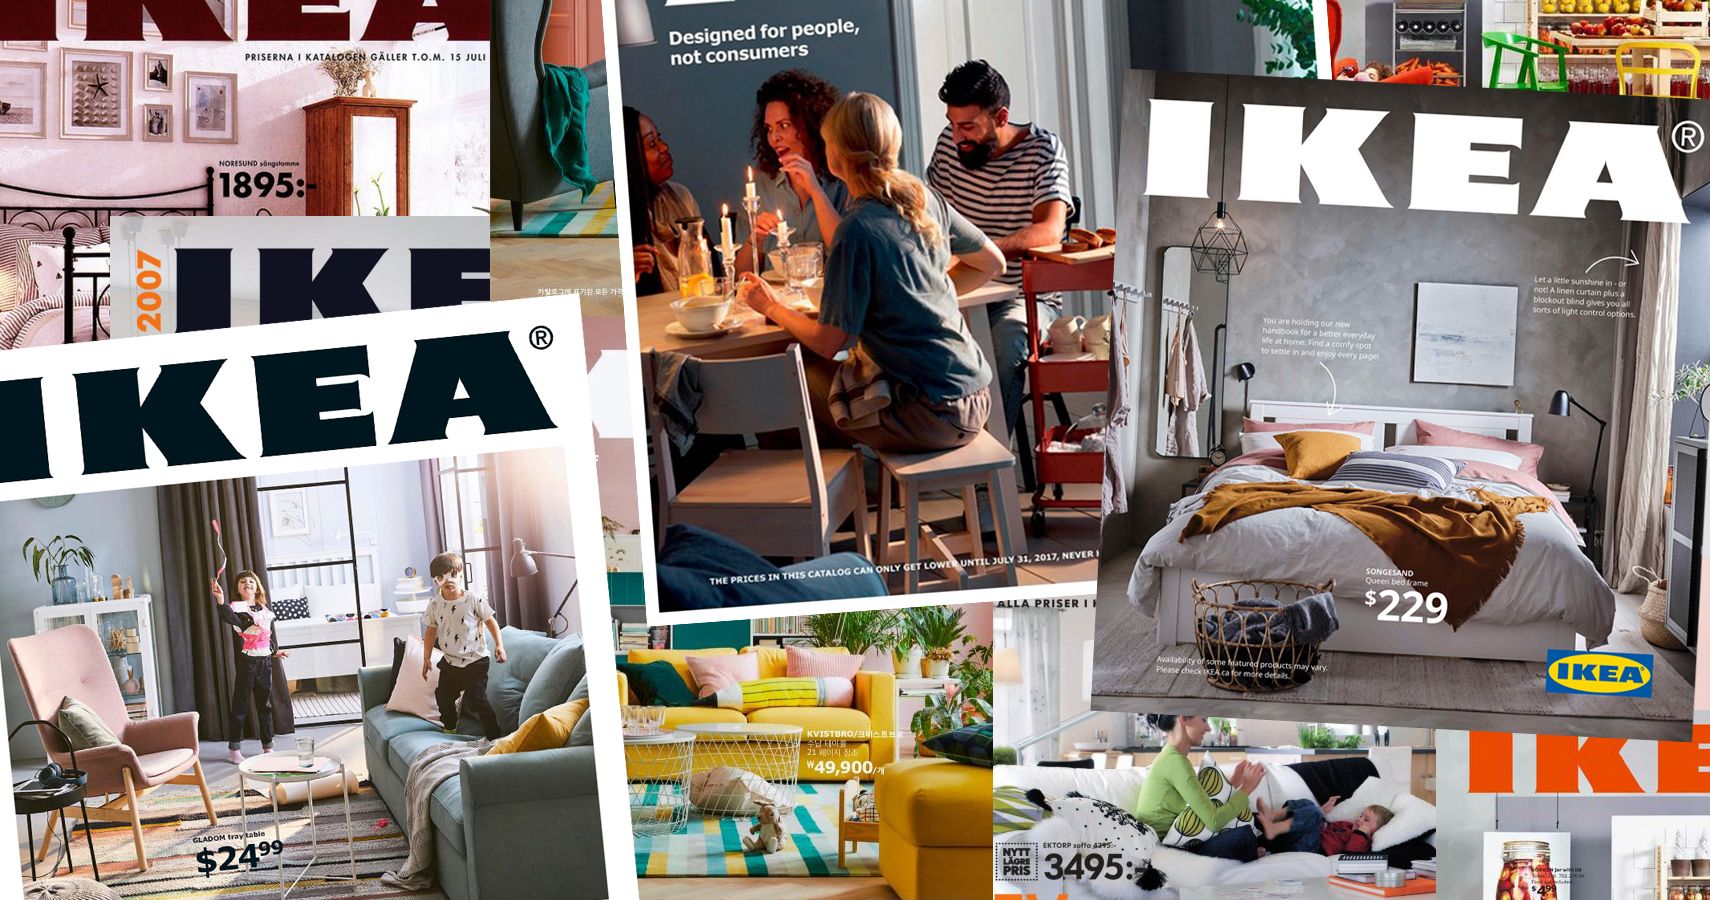 Ikea Is Suddenly Scrapping Their Iconic Catalogues